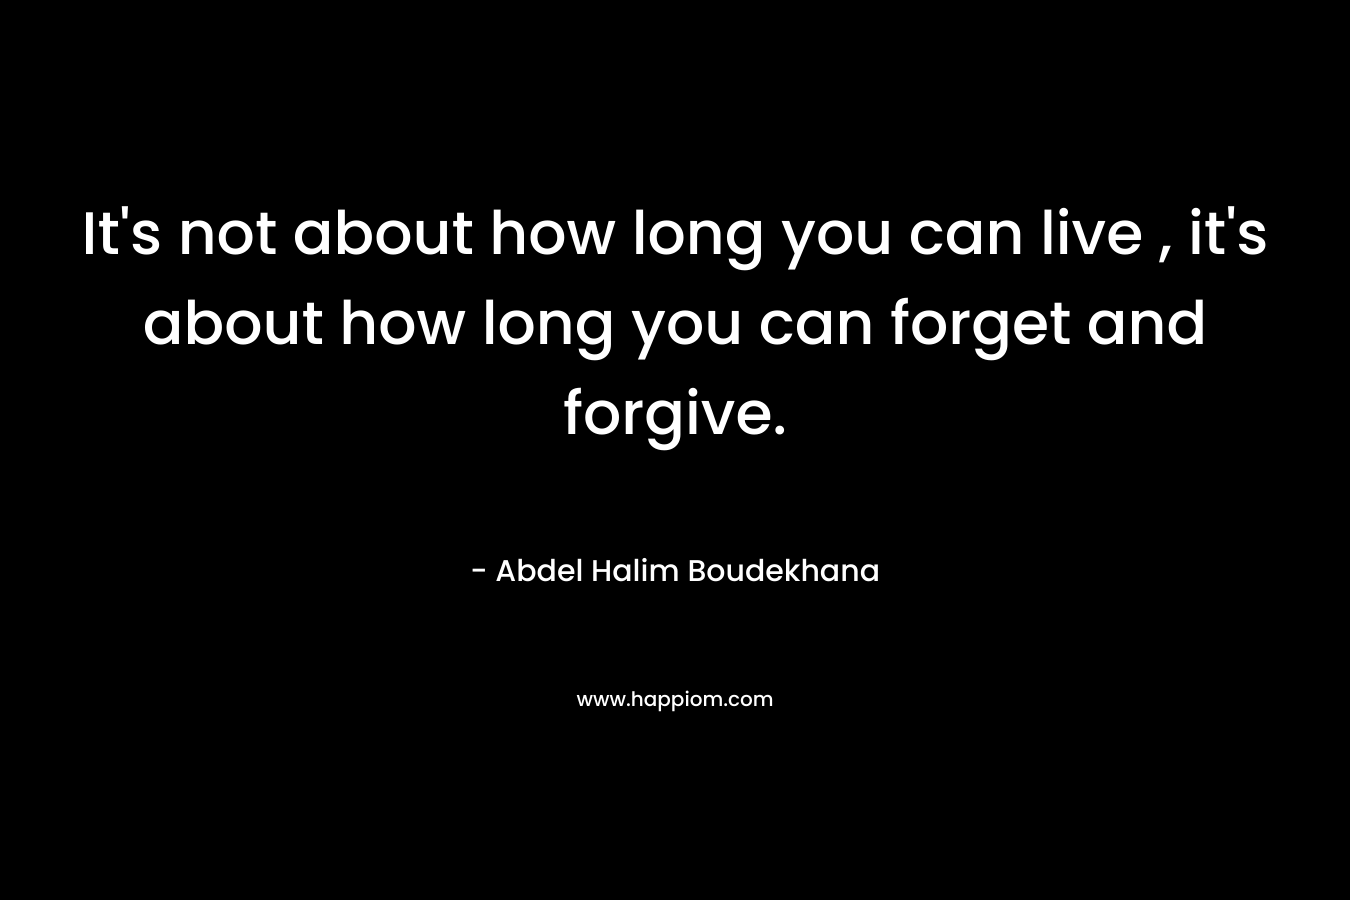 It's not about how long you can live , it's about how long you can forget and forgive.